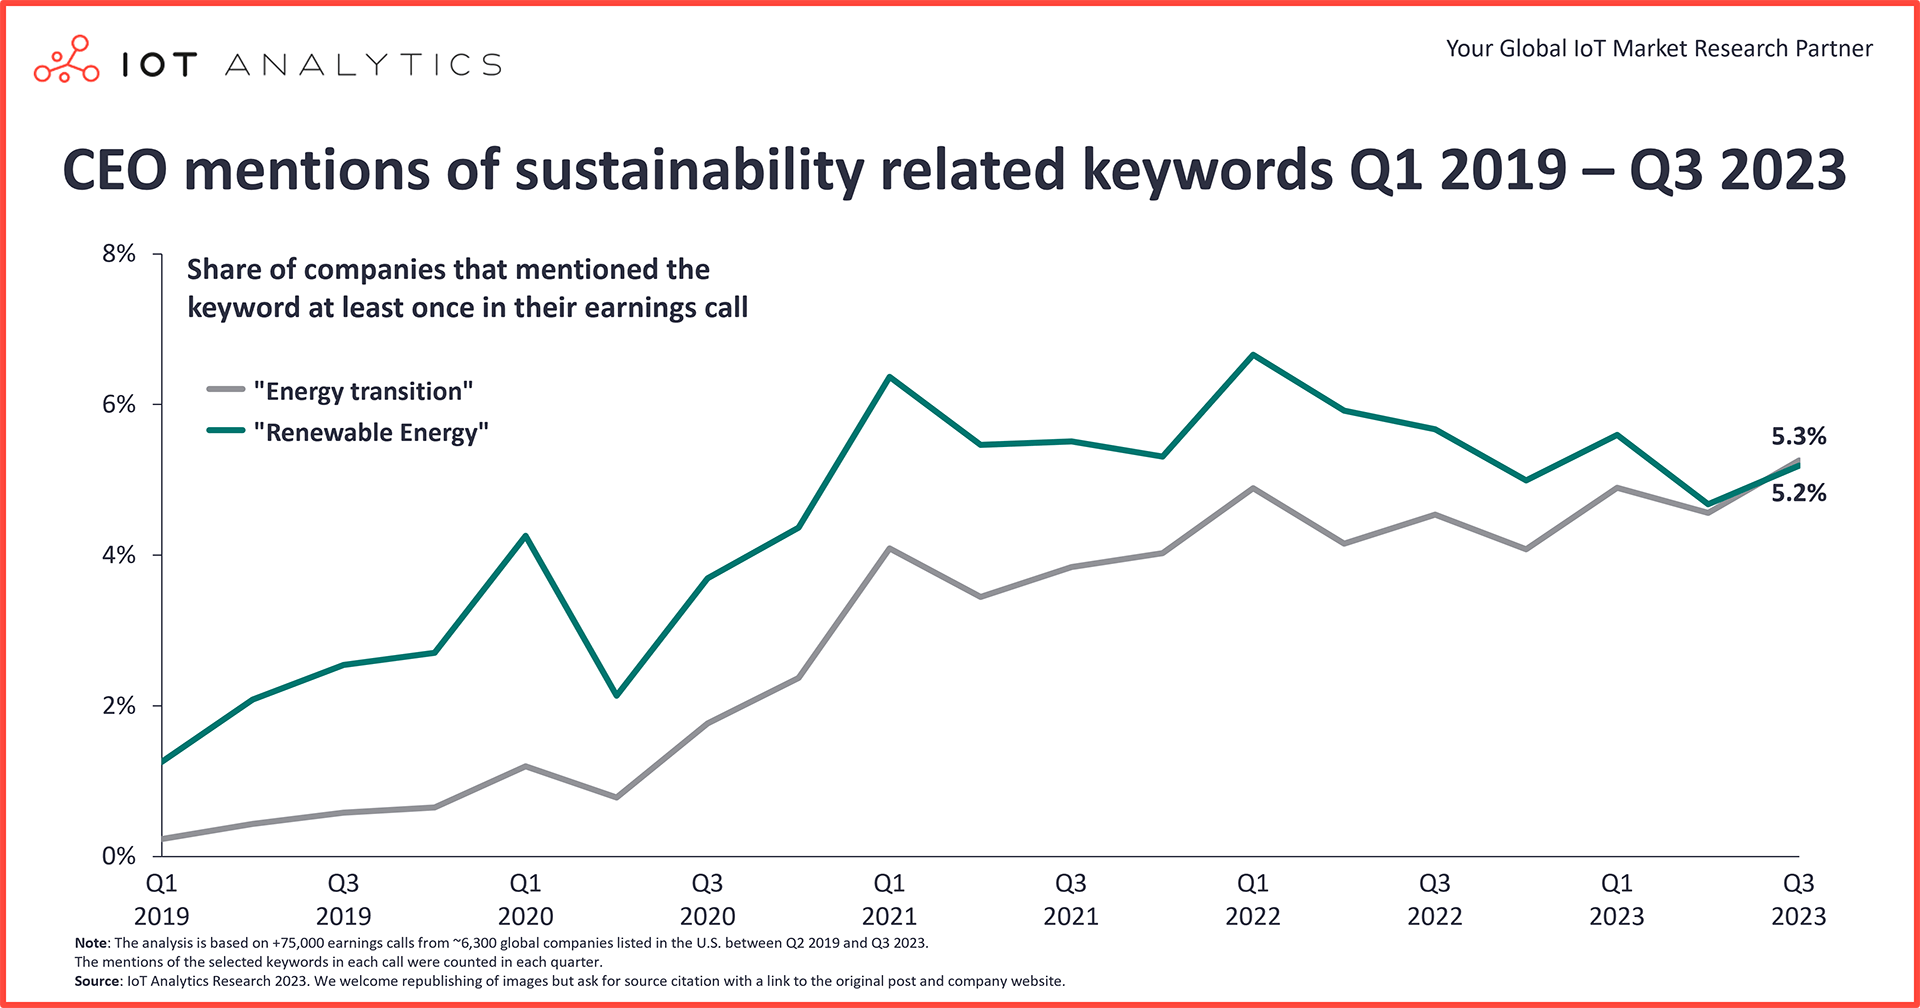 CEO mentions of sustainability related keywords Q1 2029 to Q3 2023